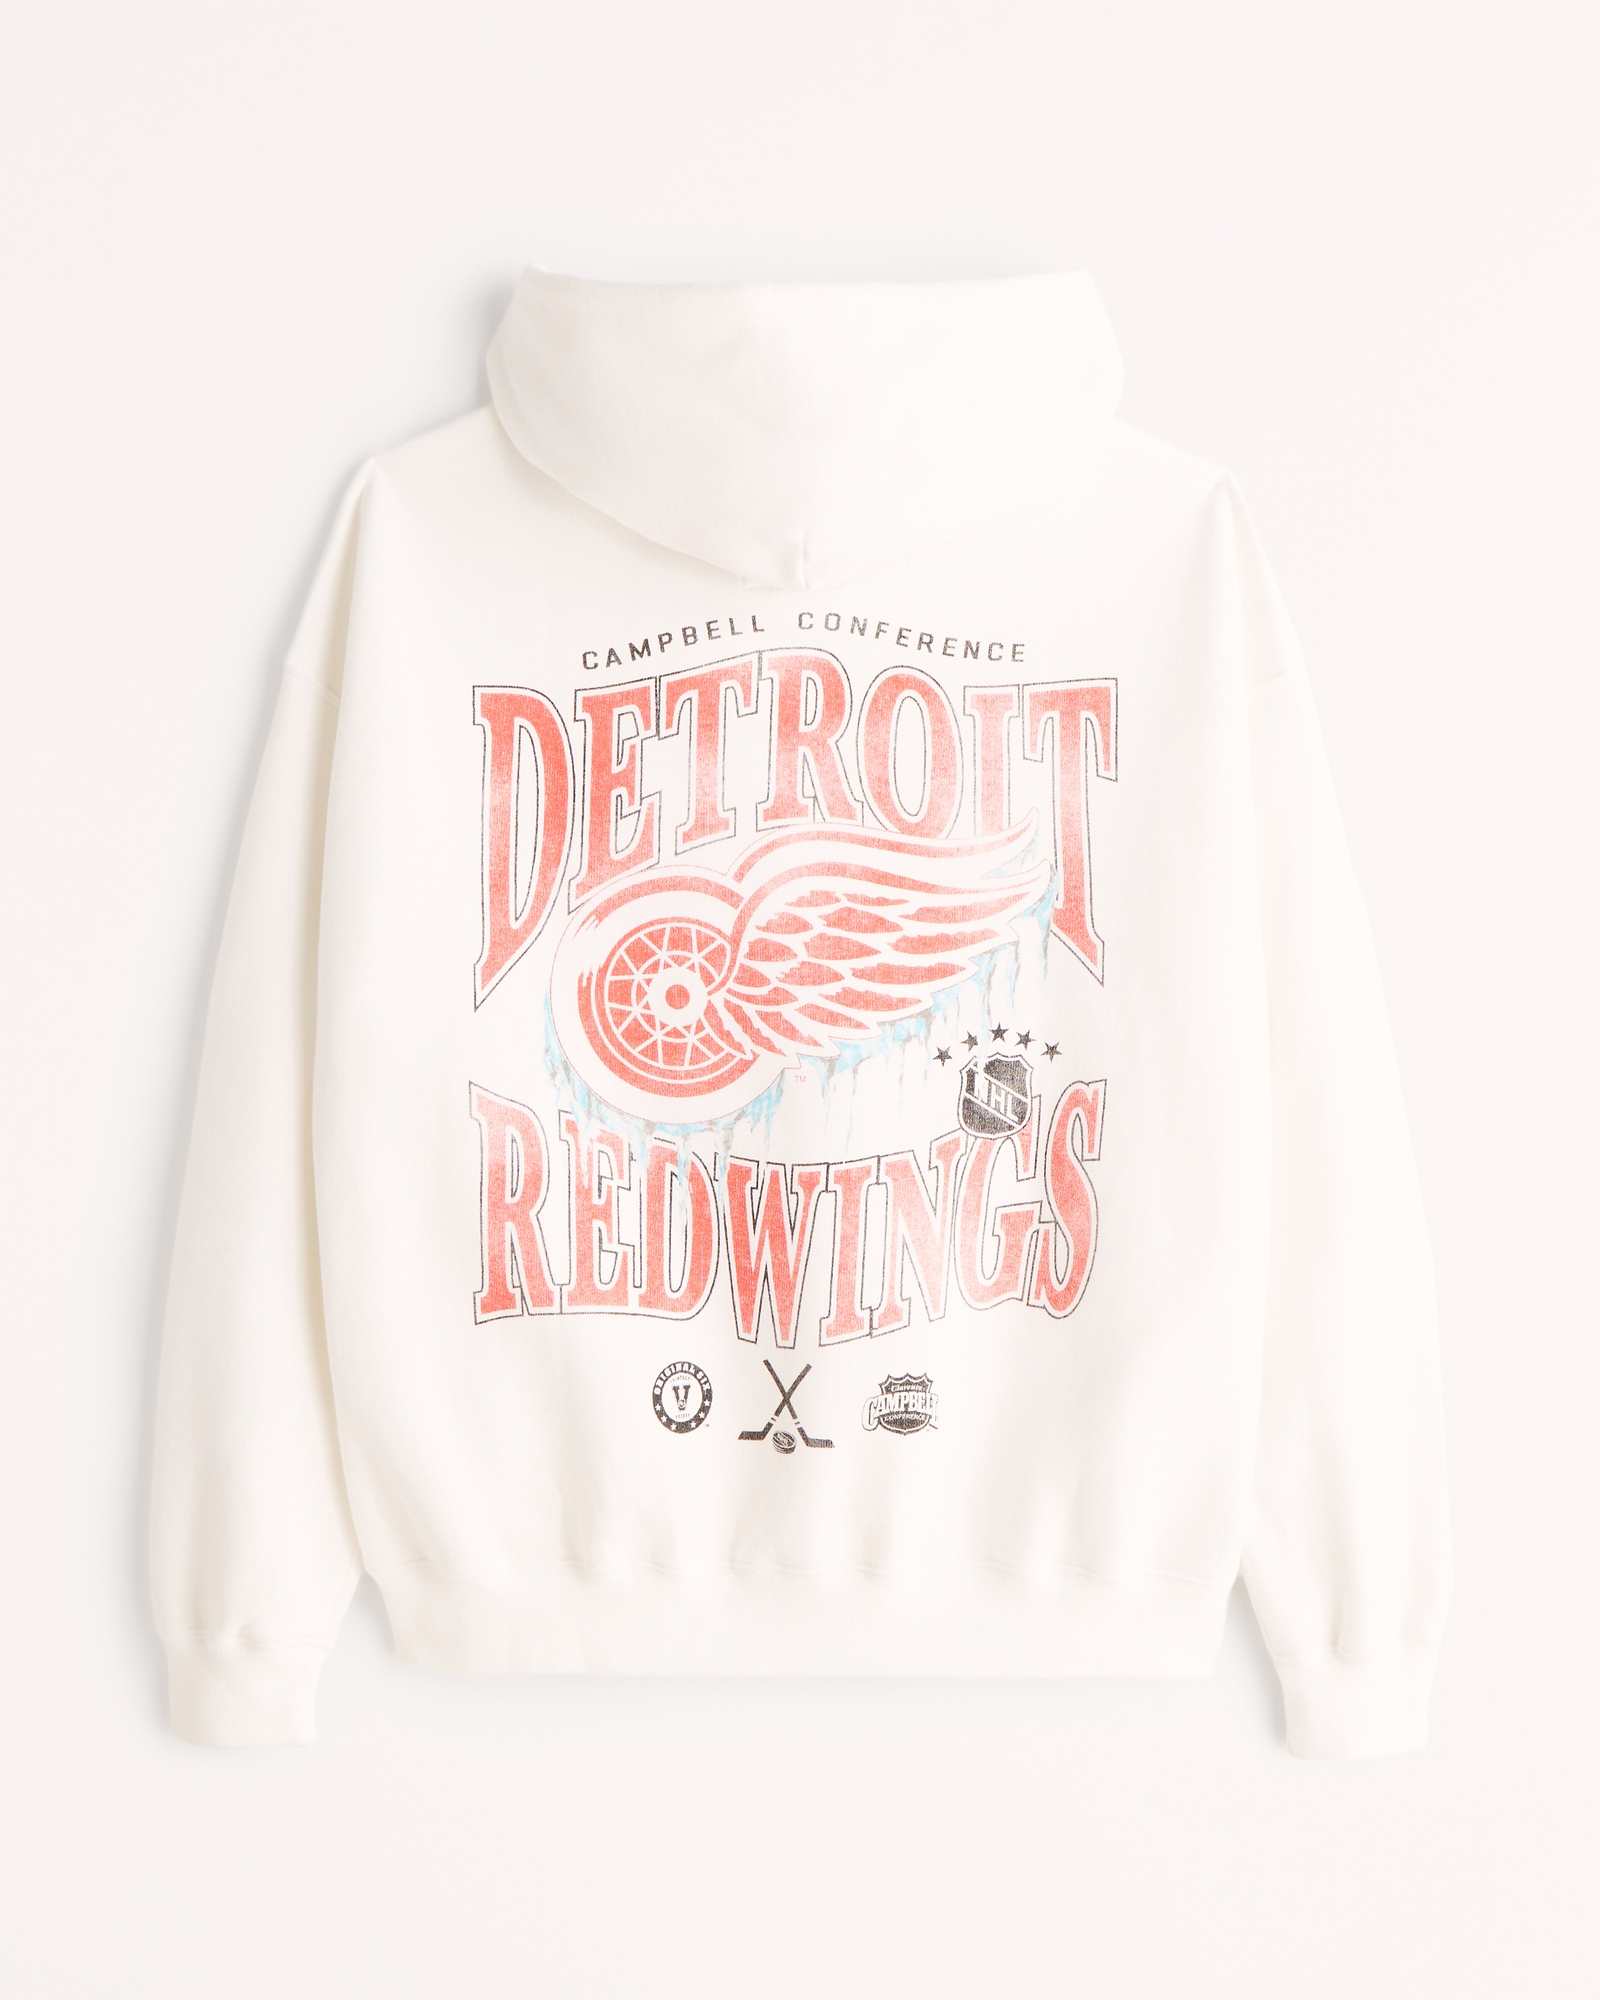 Detroit Red Wings Child Outerstuff Tie-Dye Pullover Hoodie - Red